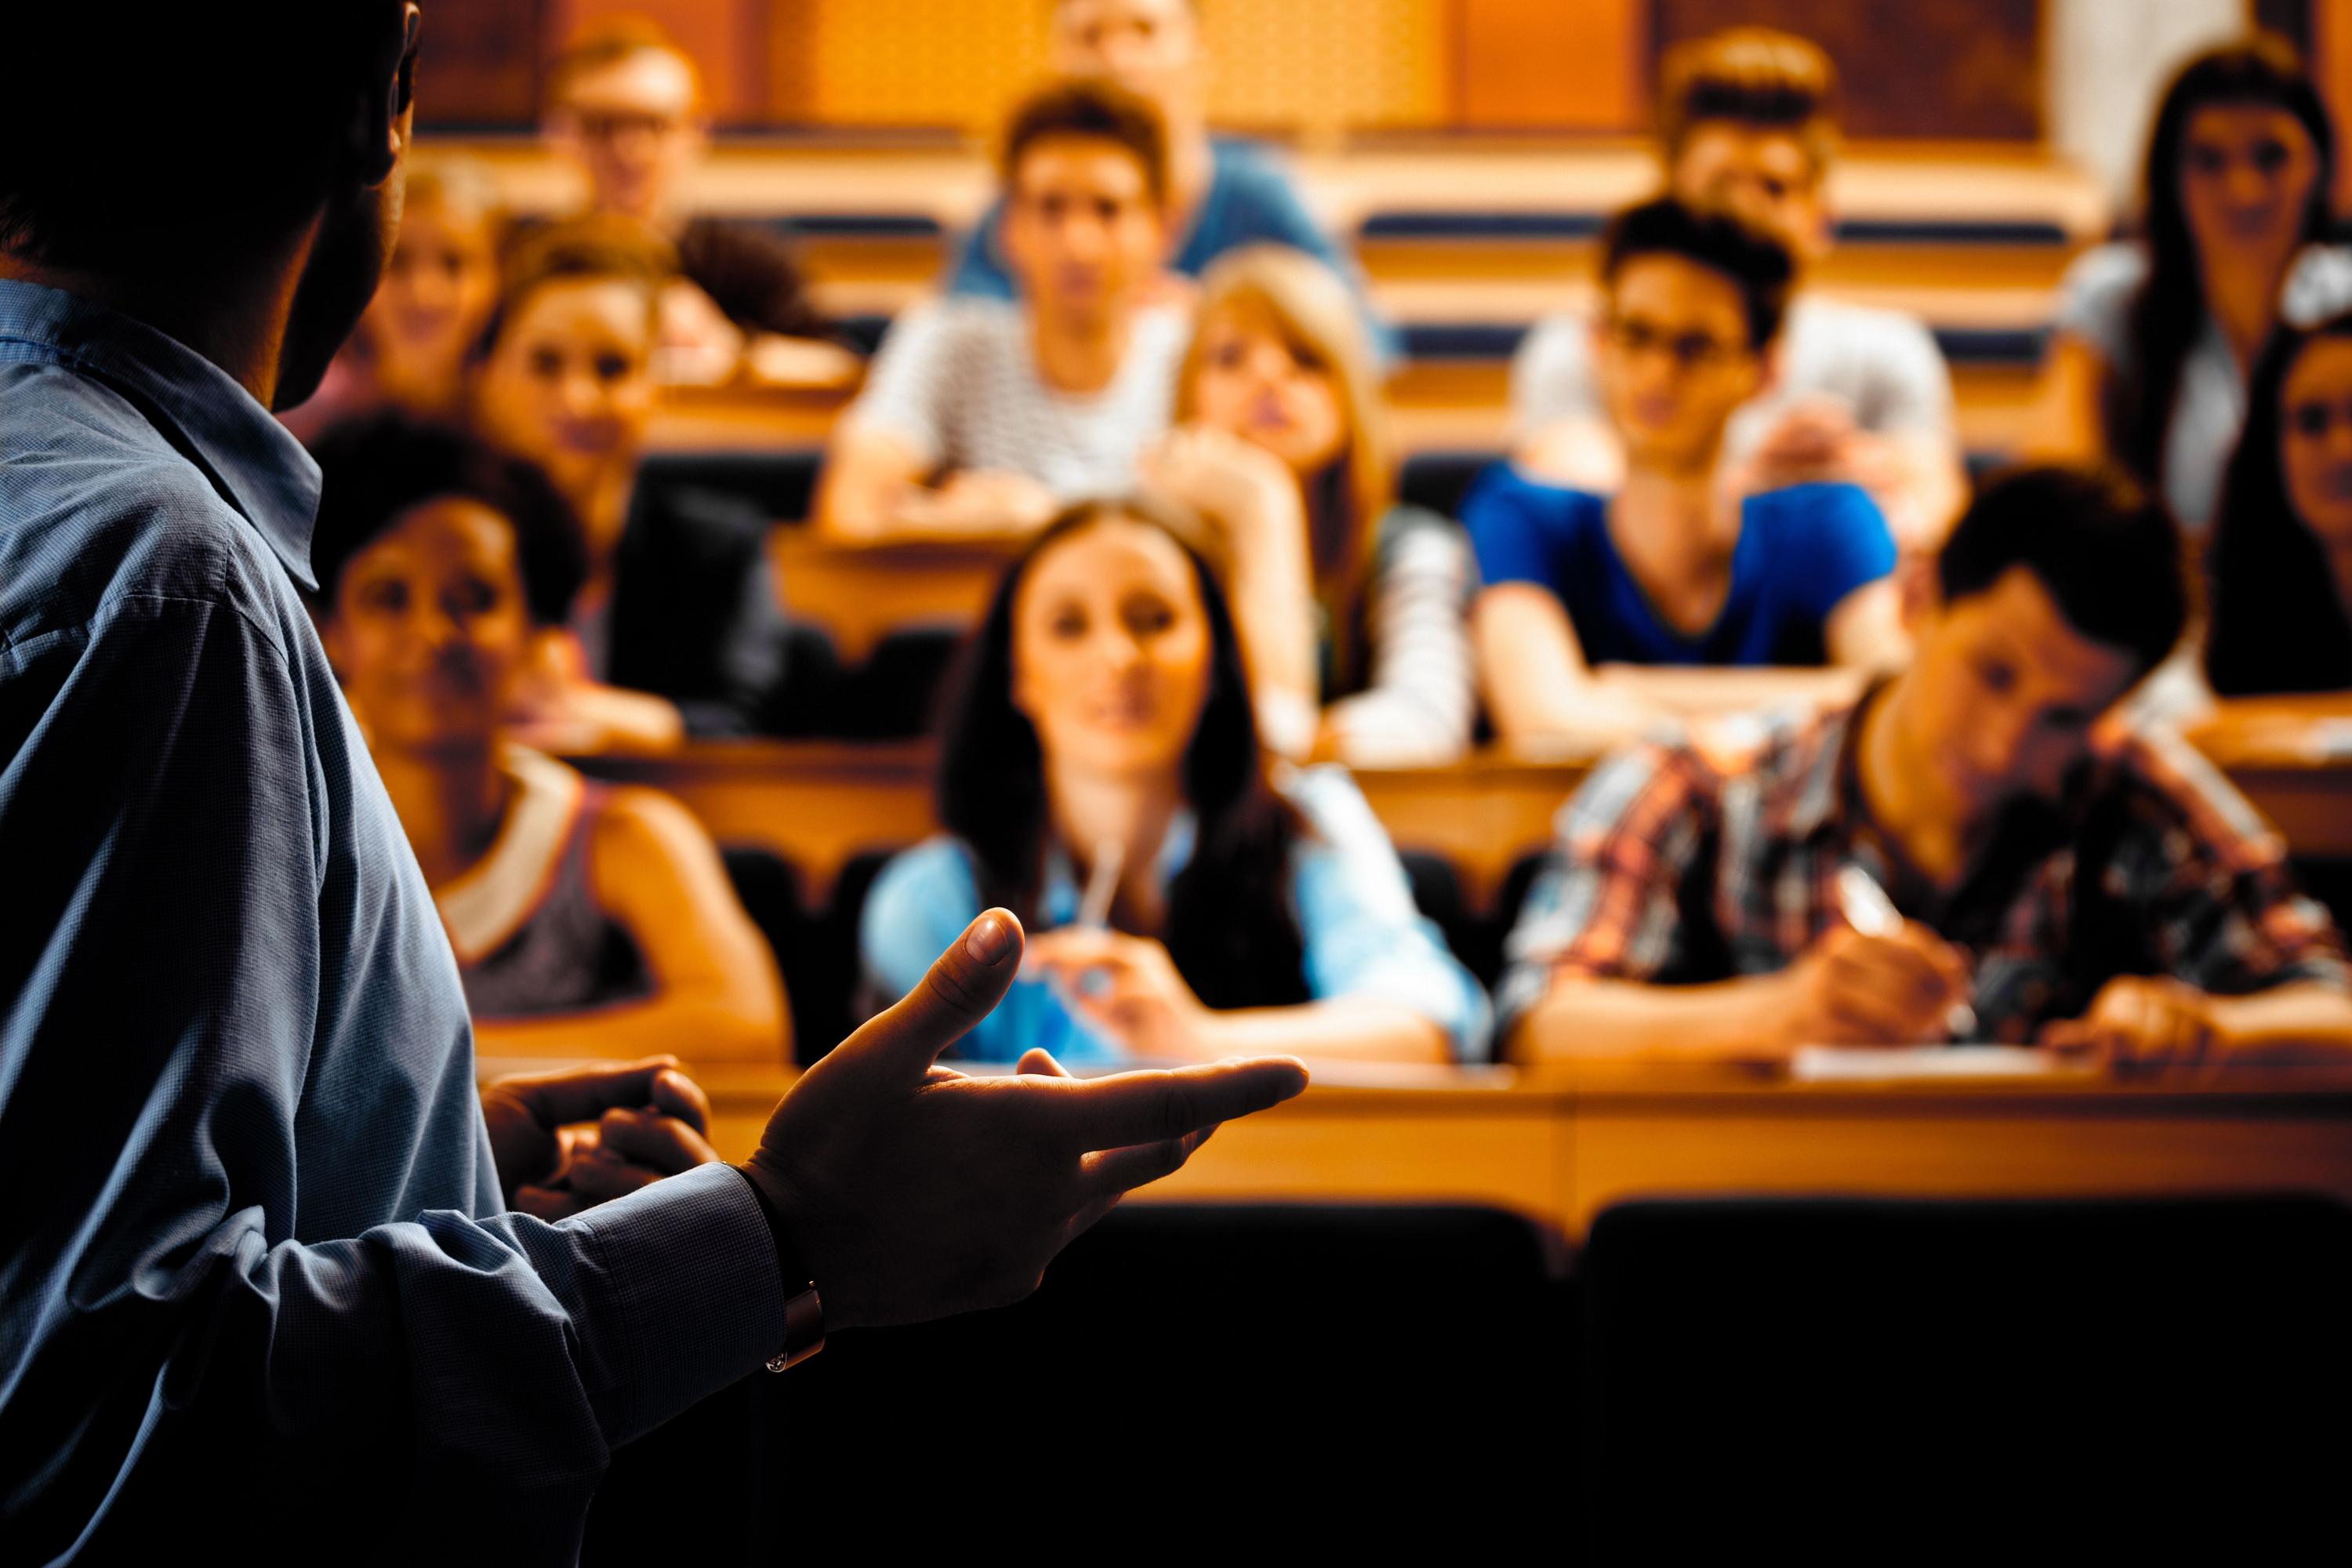 A man is giving a presentation to a large group of students in a lecture hall.